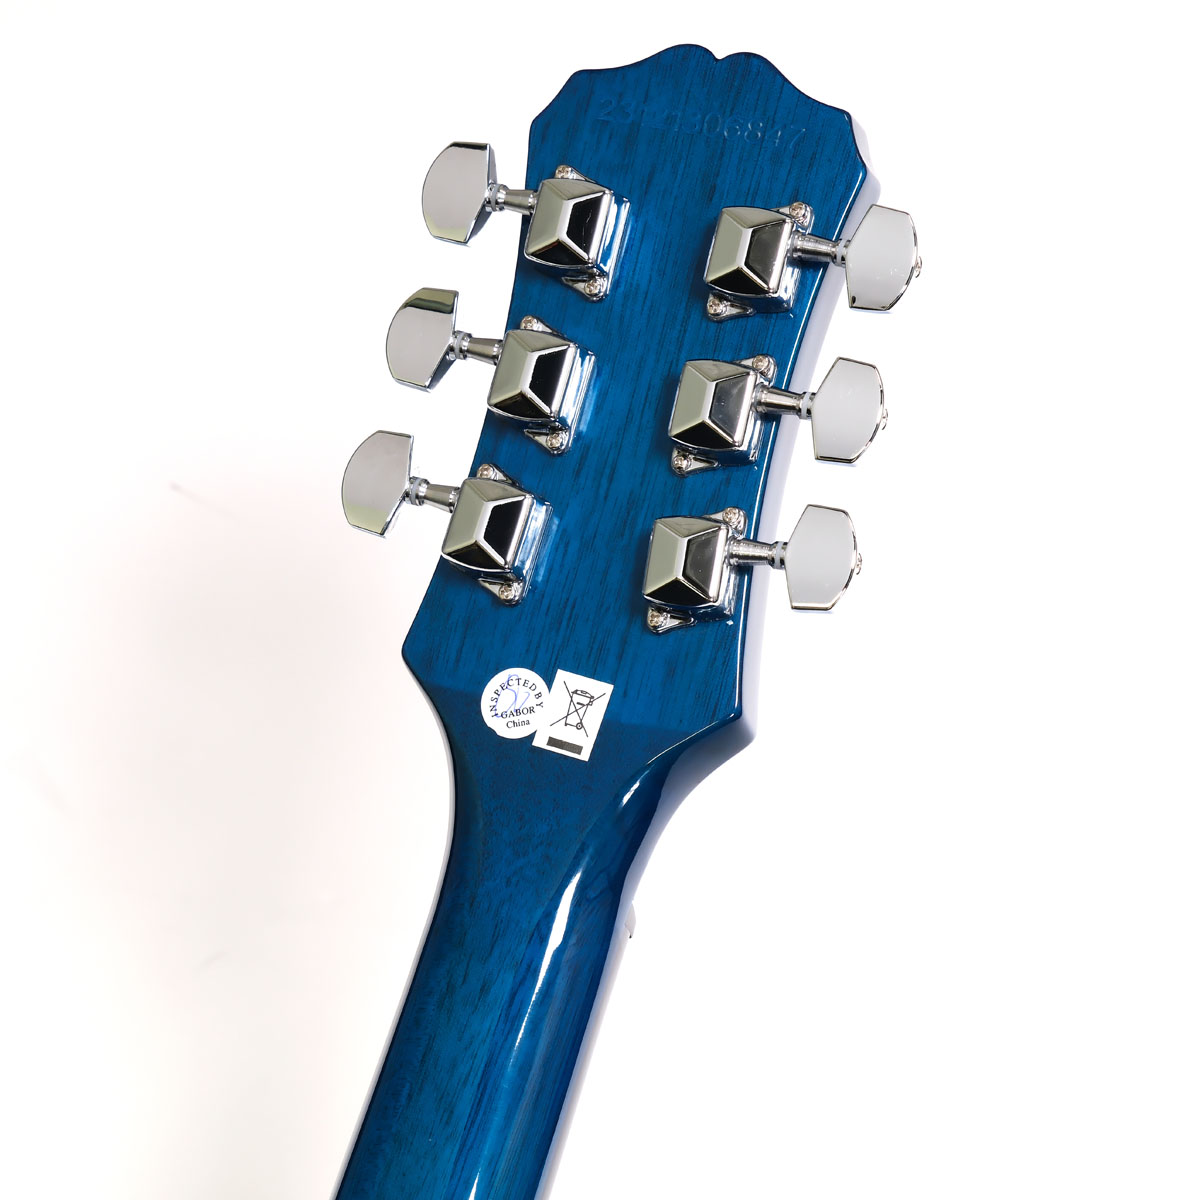 Epiphone / Limited Edition Les Paul Special-II Plus Top Trans Blue